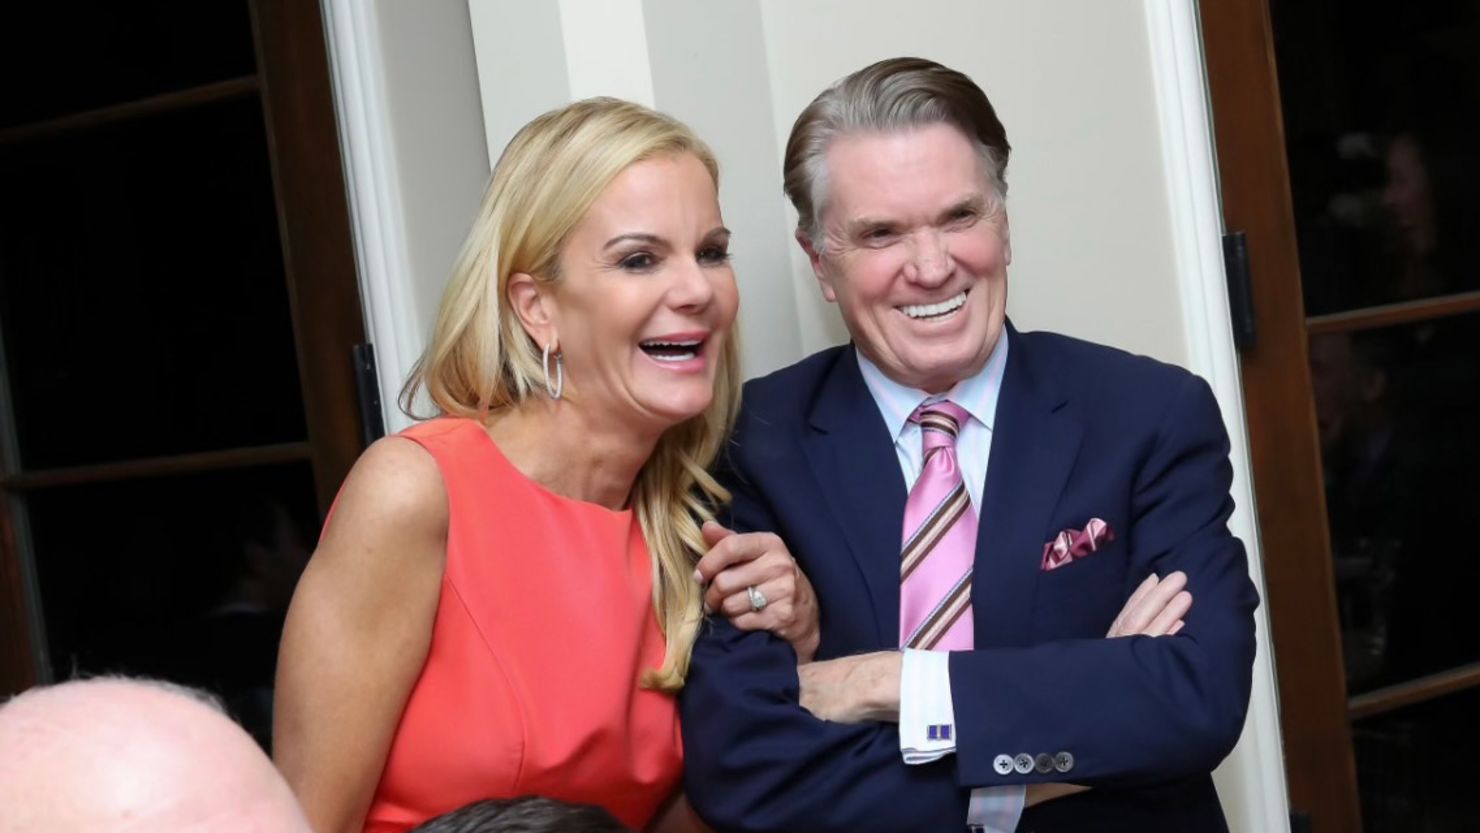 Former White House counsel Jack Quinn, right, is pictured with his wife, Susanna Quinn.